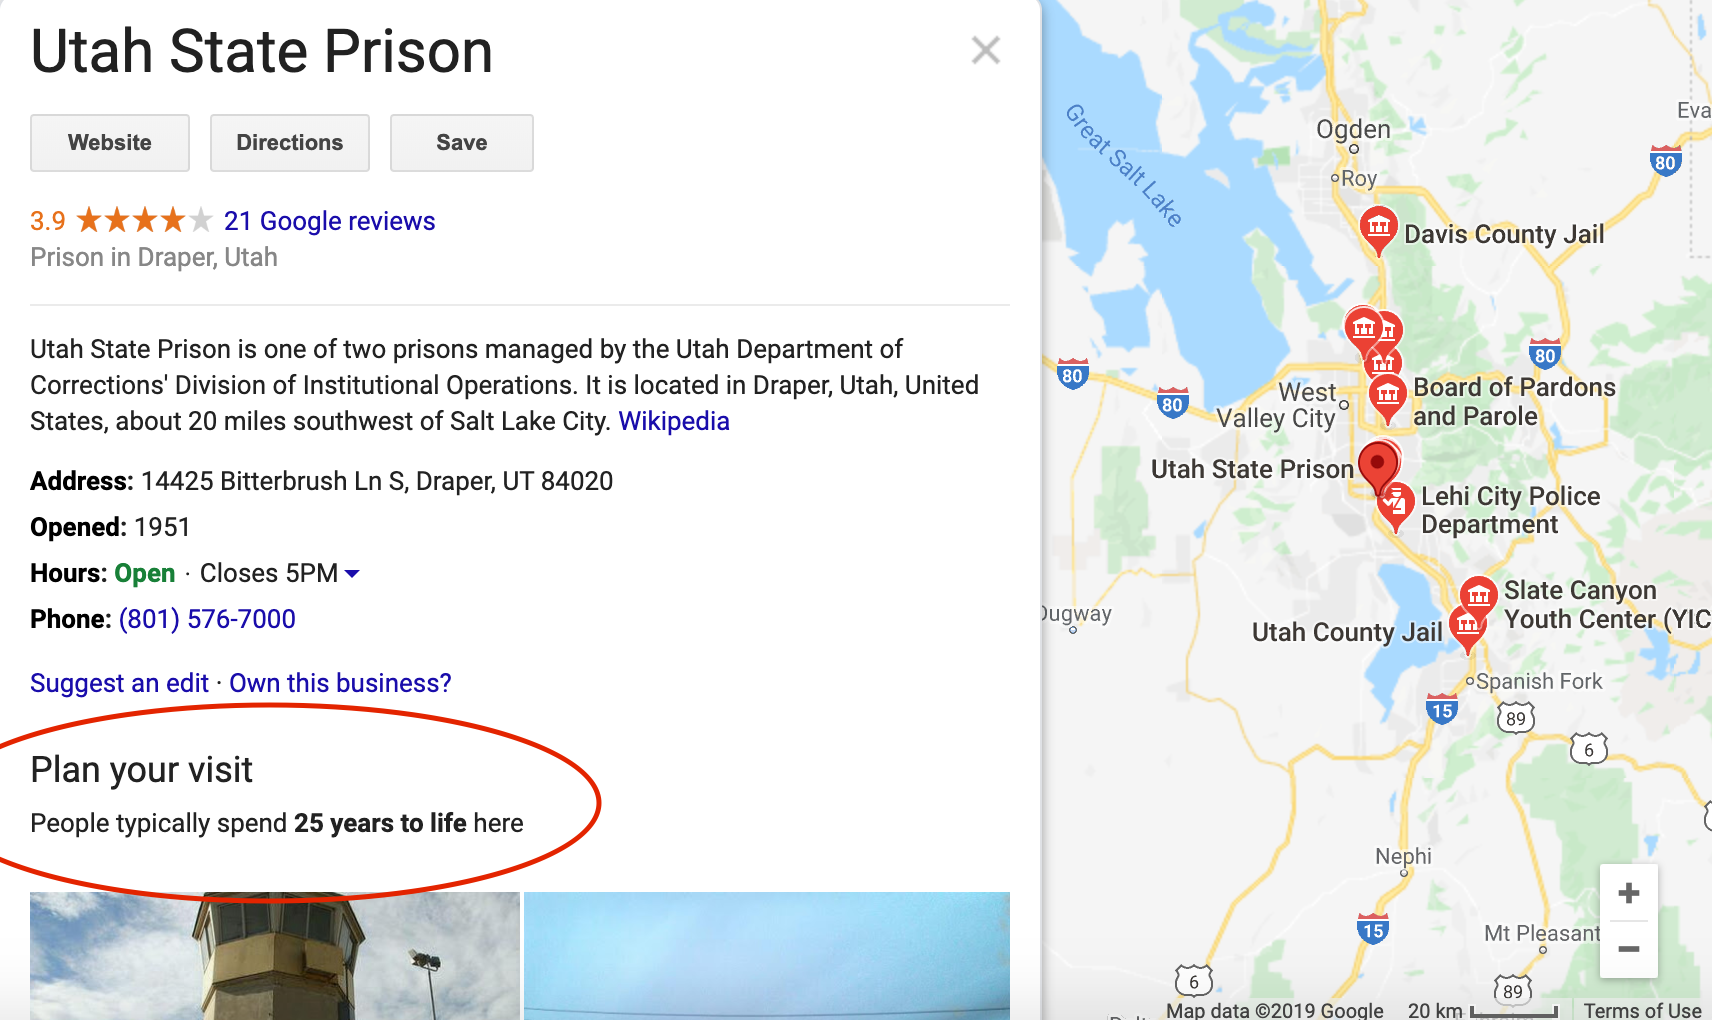 Planning a trip to the state prison? Utah got no chill.